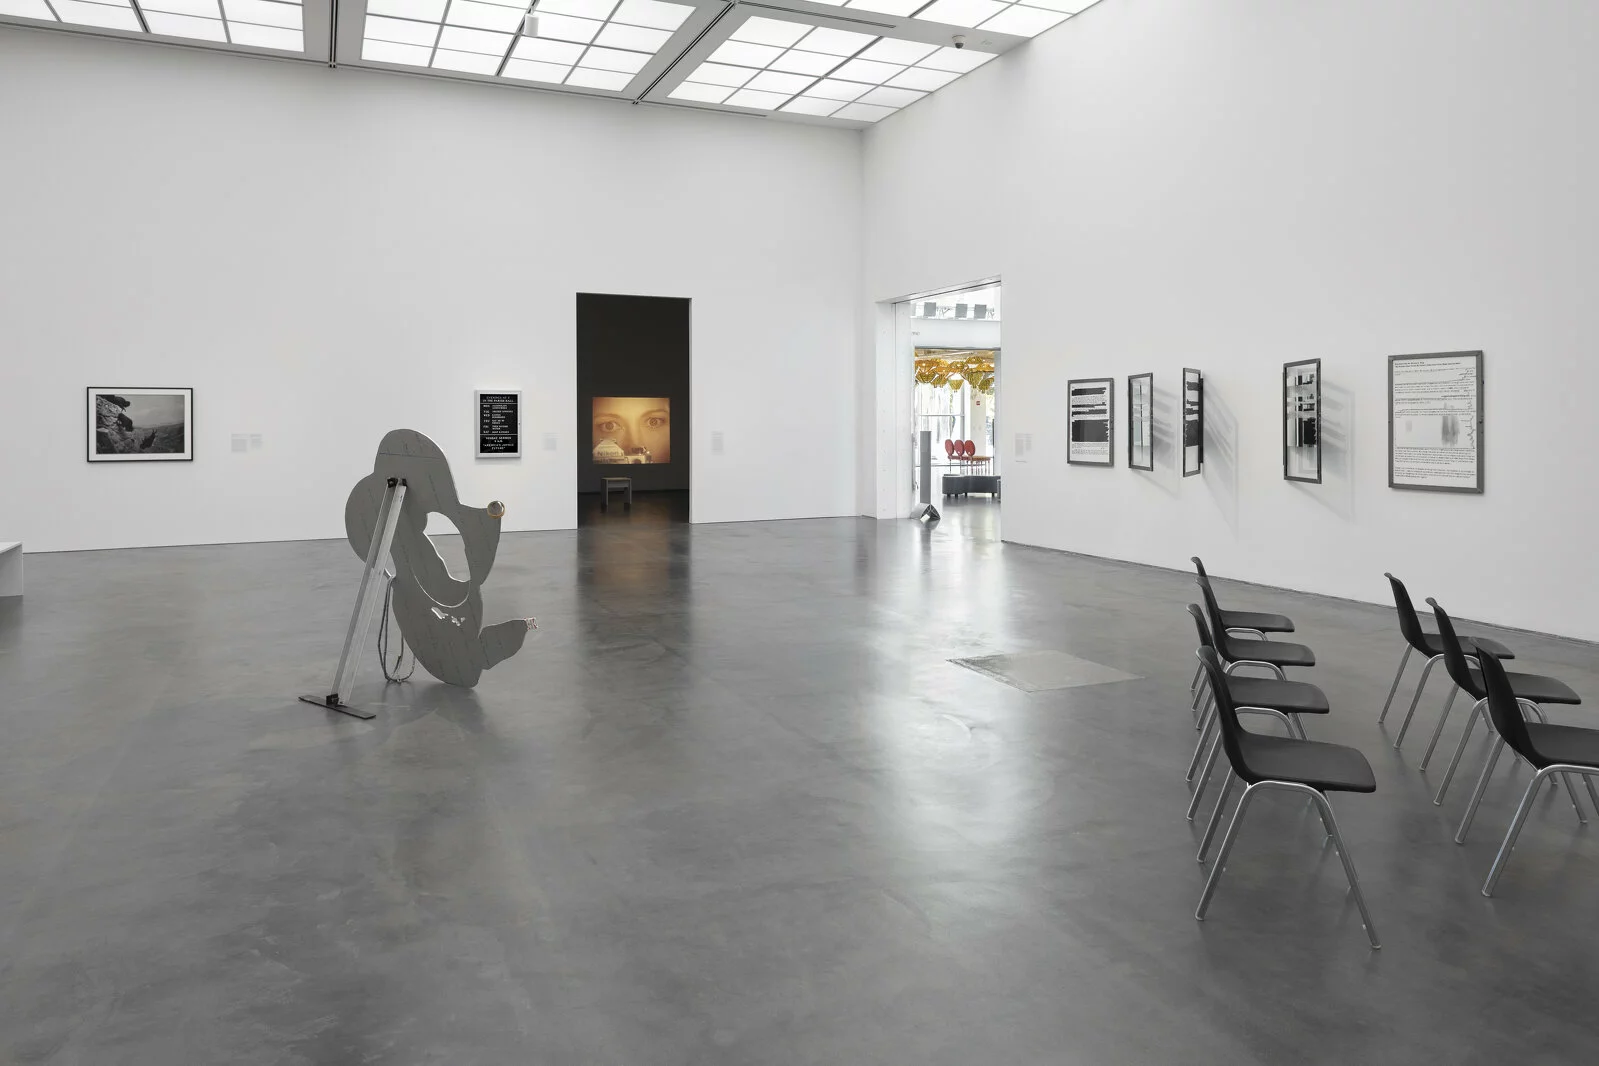 A large, white-walled gallery space filled with several artworks visible. It opens to two doorways, through which you can see additional artworks.